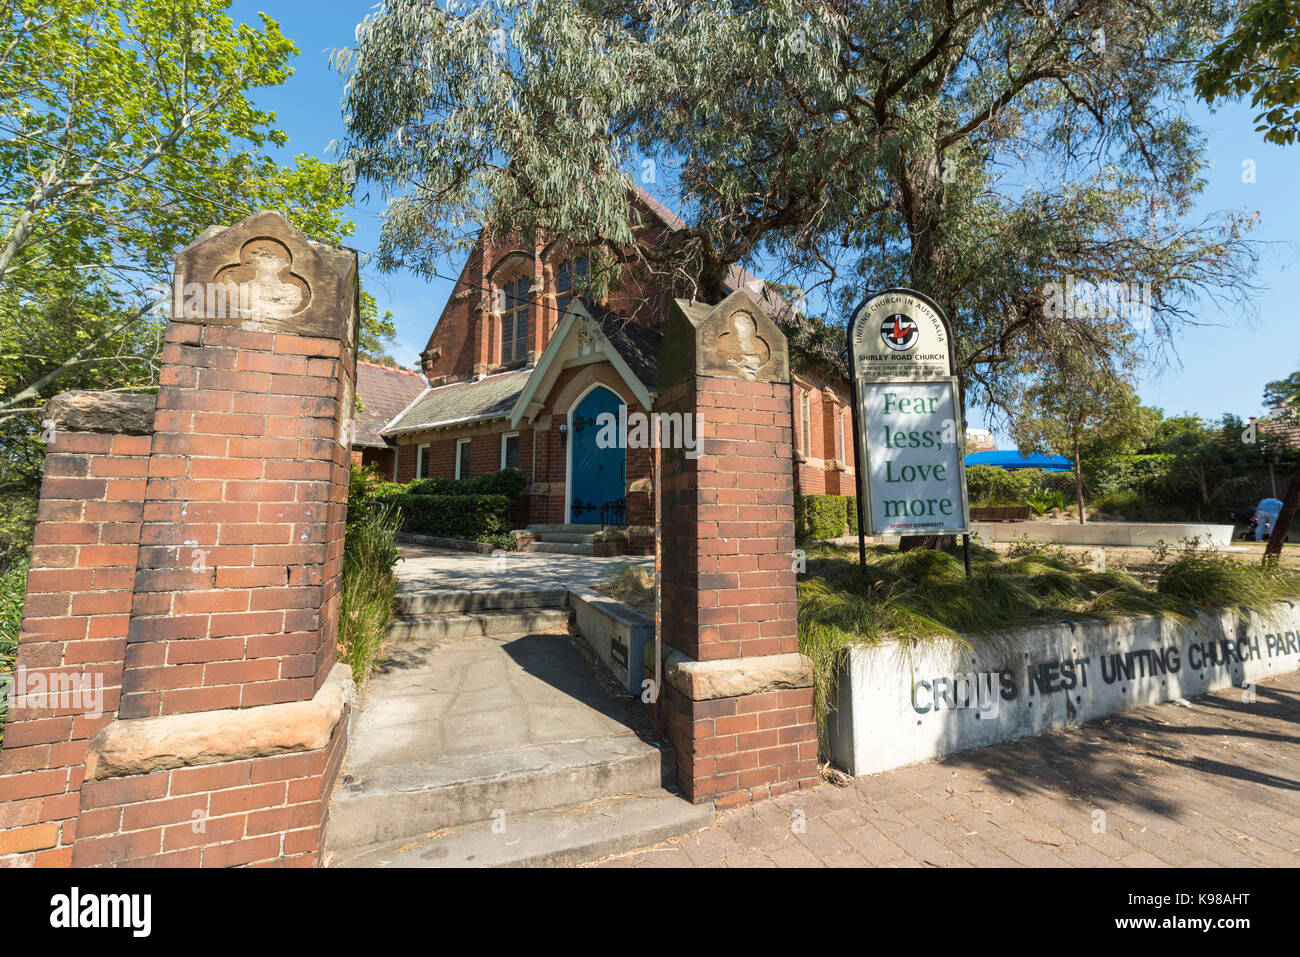 Entrance to Crows Nest Uniting Church, North Shore, Sydney Stock Photo